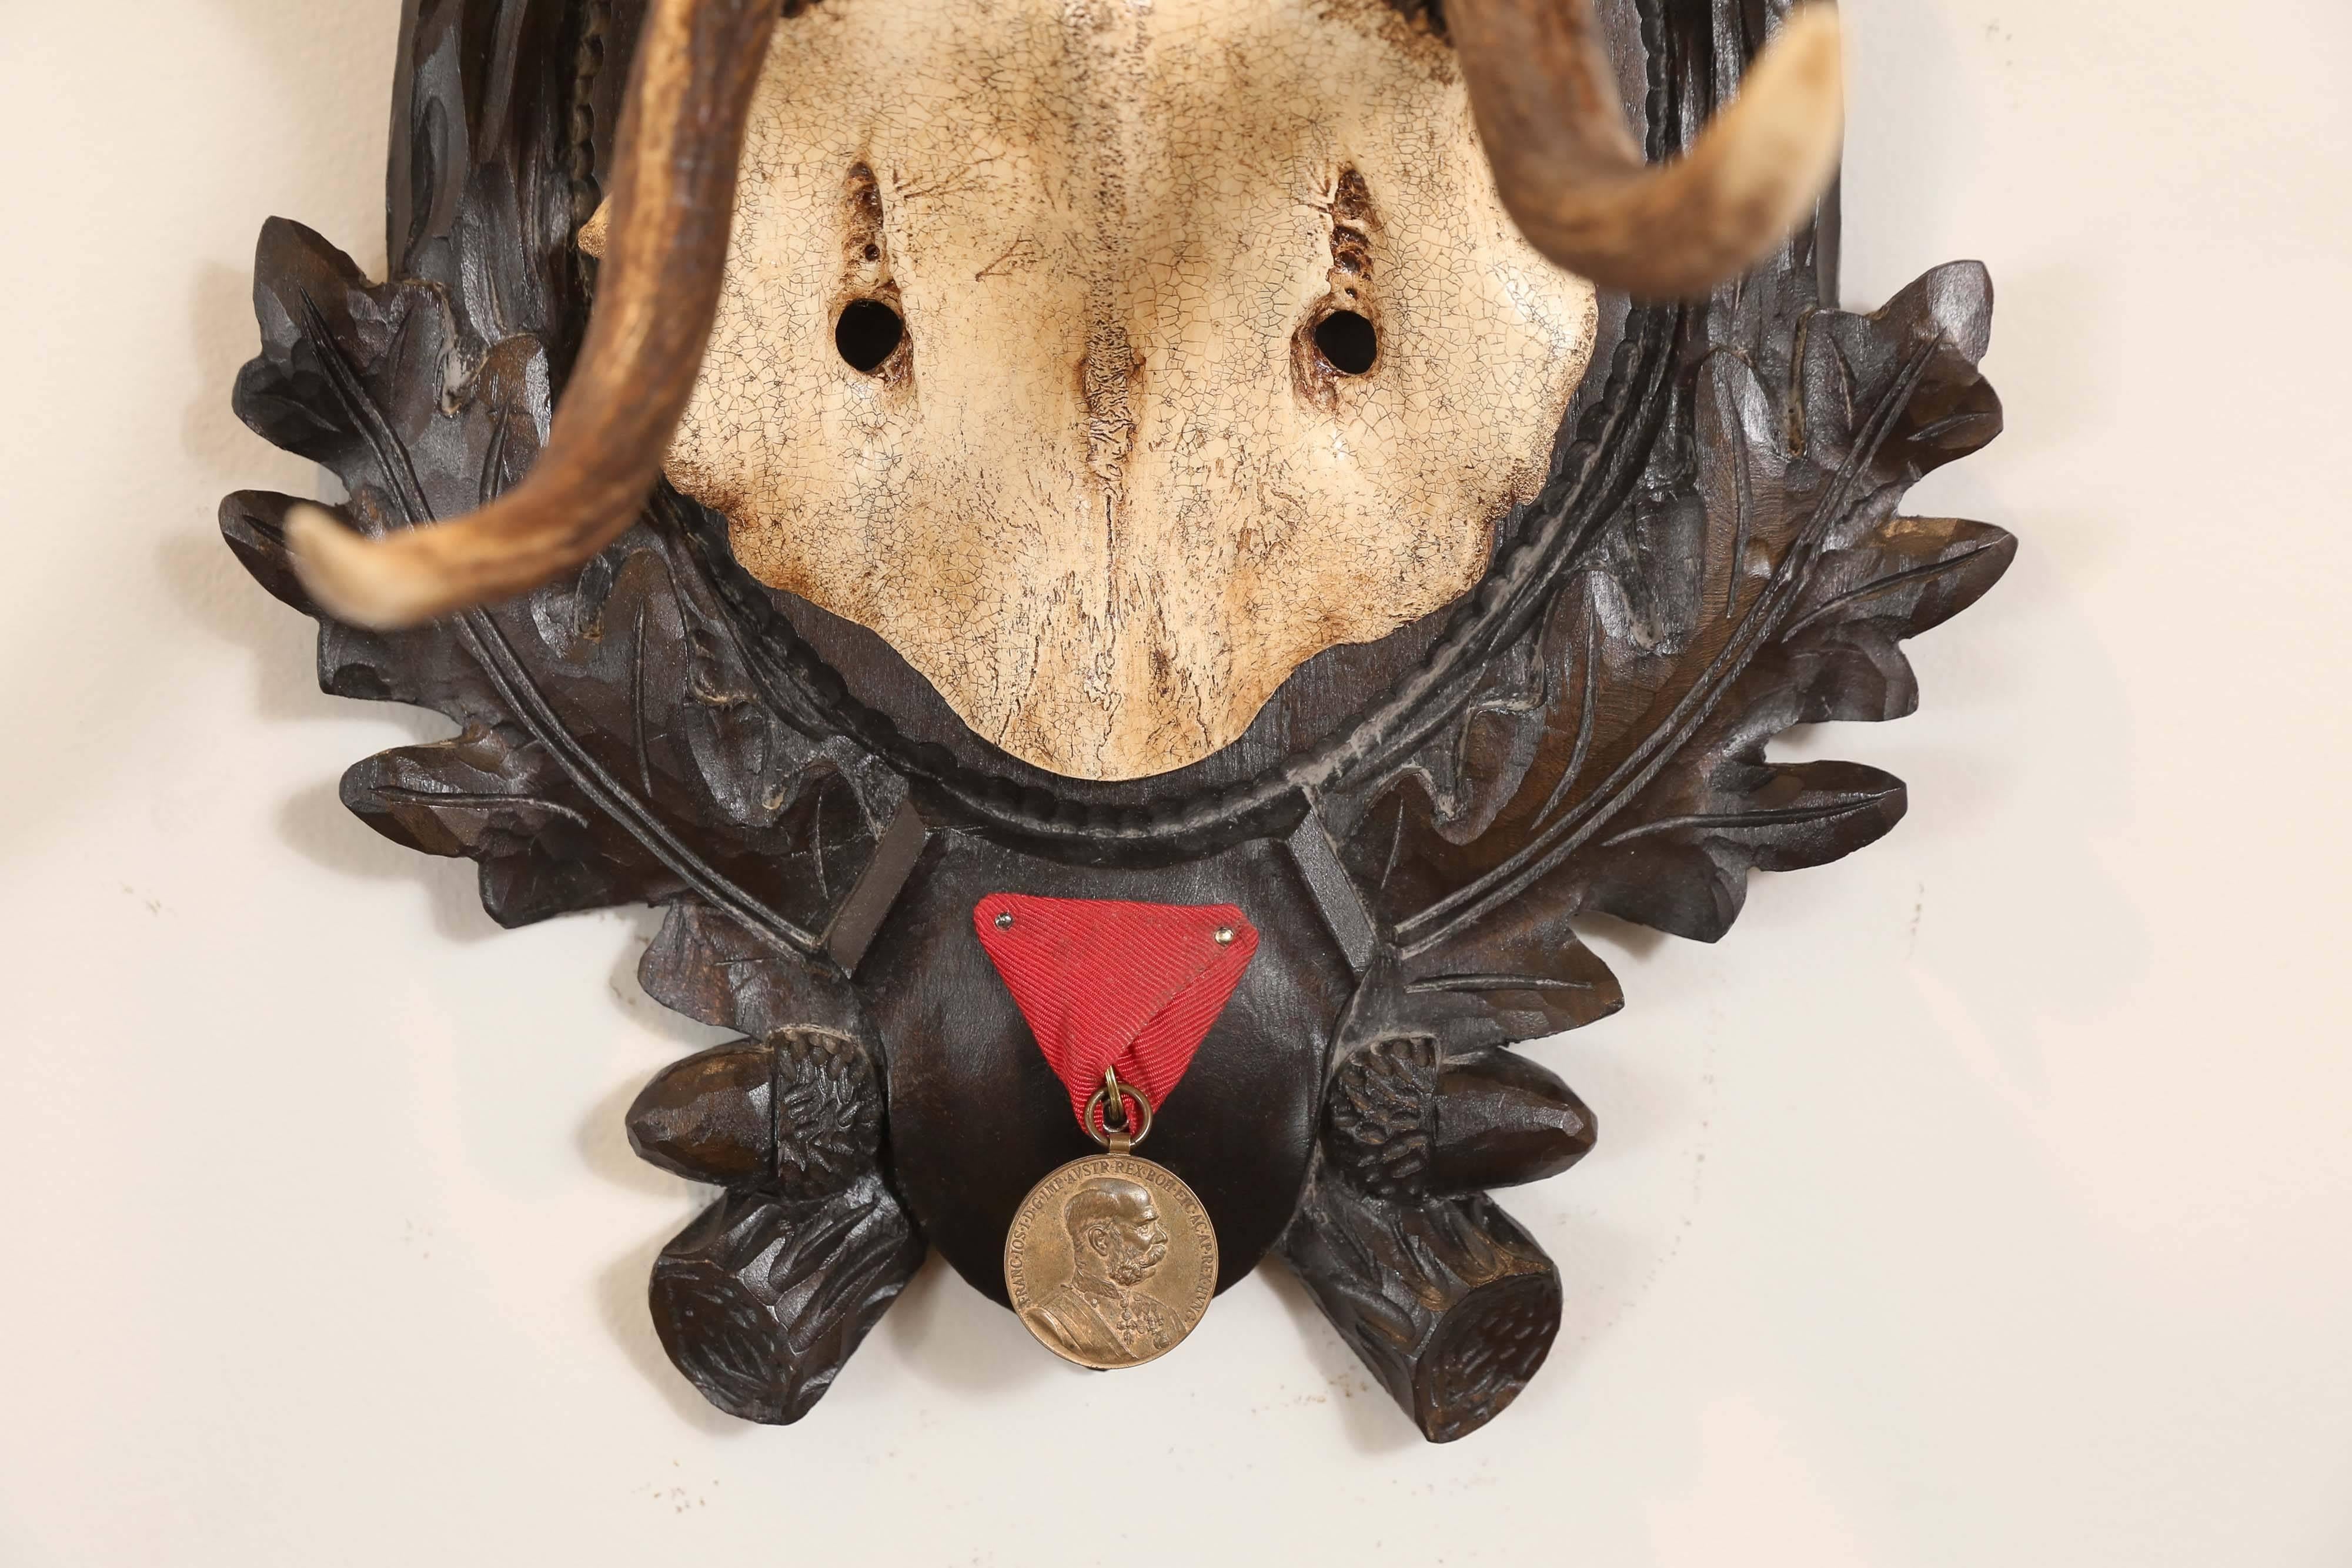 19th century fallow deer trophy from Emperor Franz Josef's castle at Eckartsau in the Southern Austrian Alps, a favourite hunting schloss of the Habsburg Royal family. This historic hunting trophy features the original black forest carved plaque and